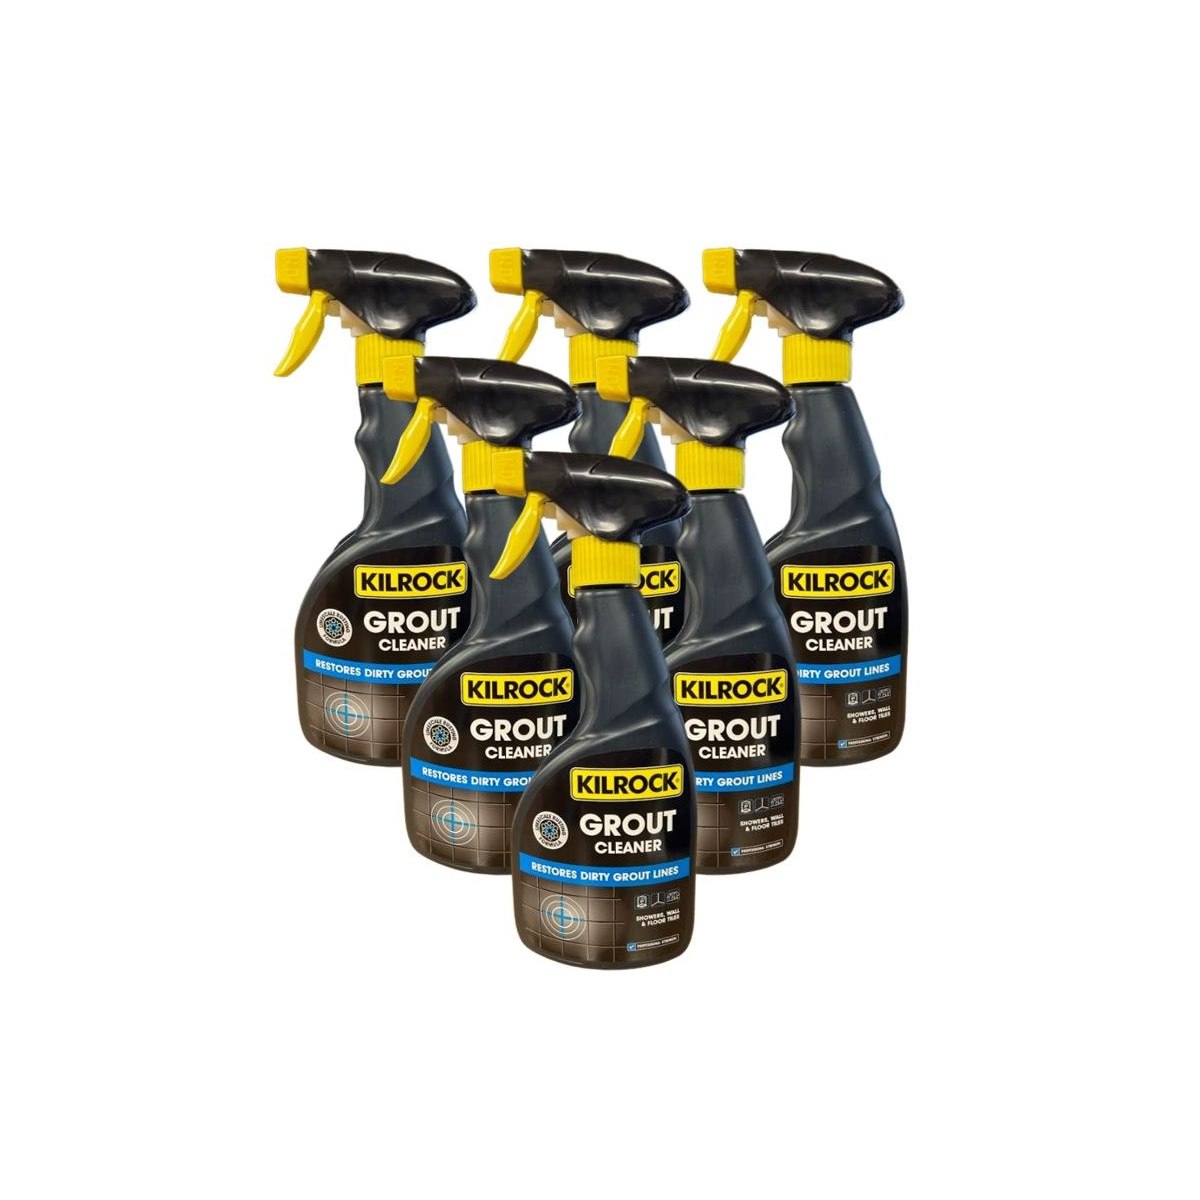 Case of 6 x Kilrock Grout Cleaner Spray 500ml